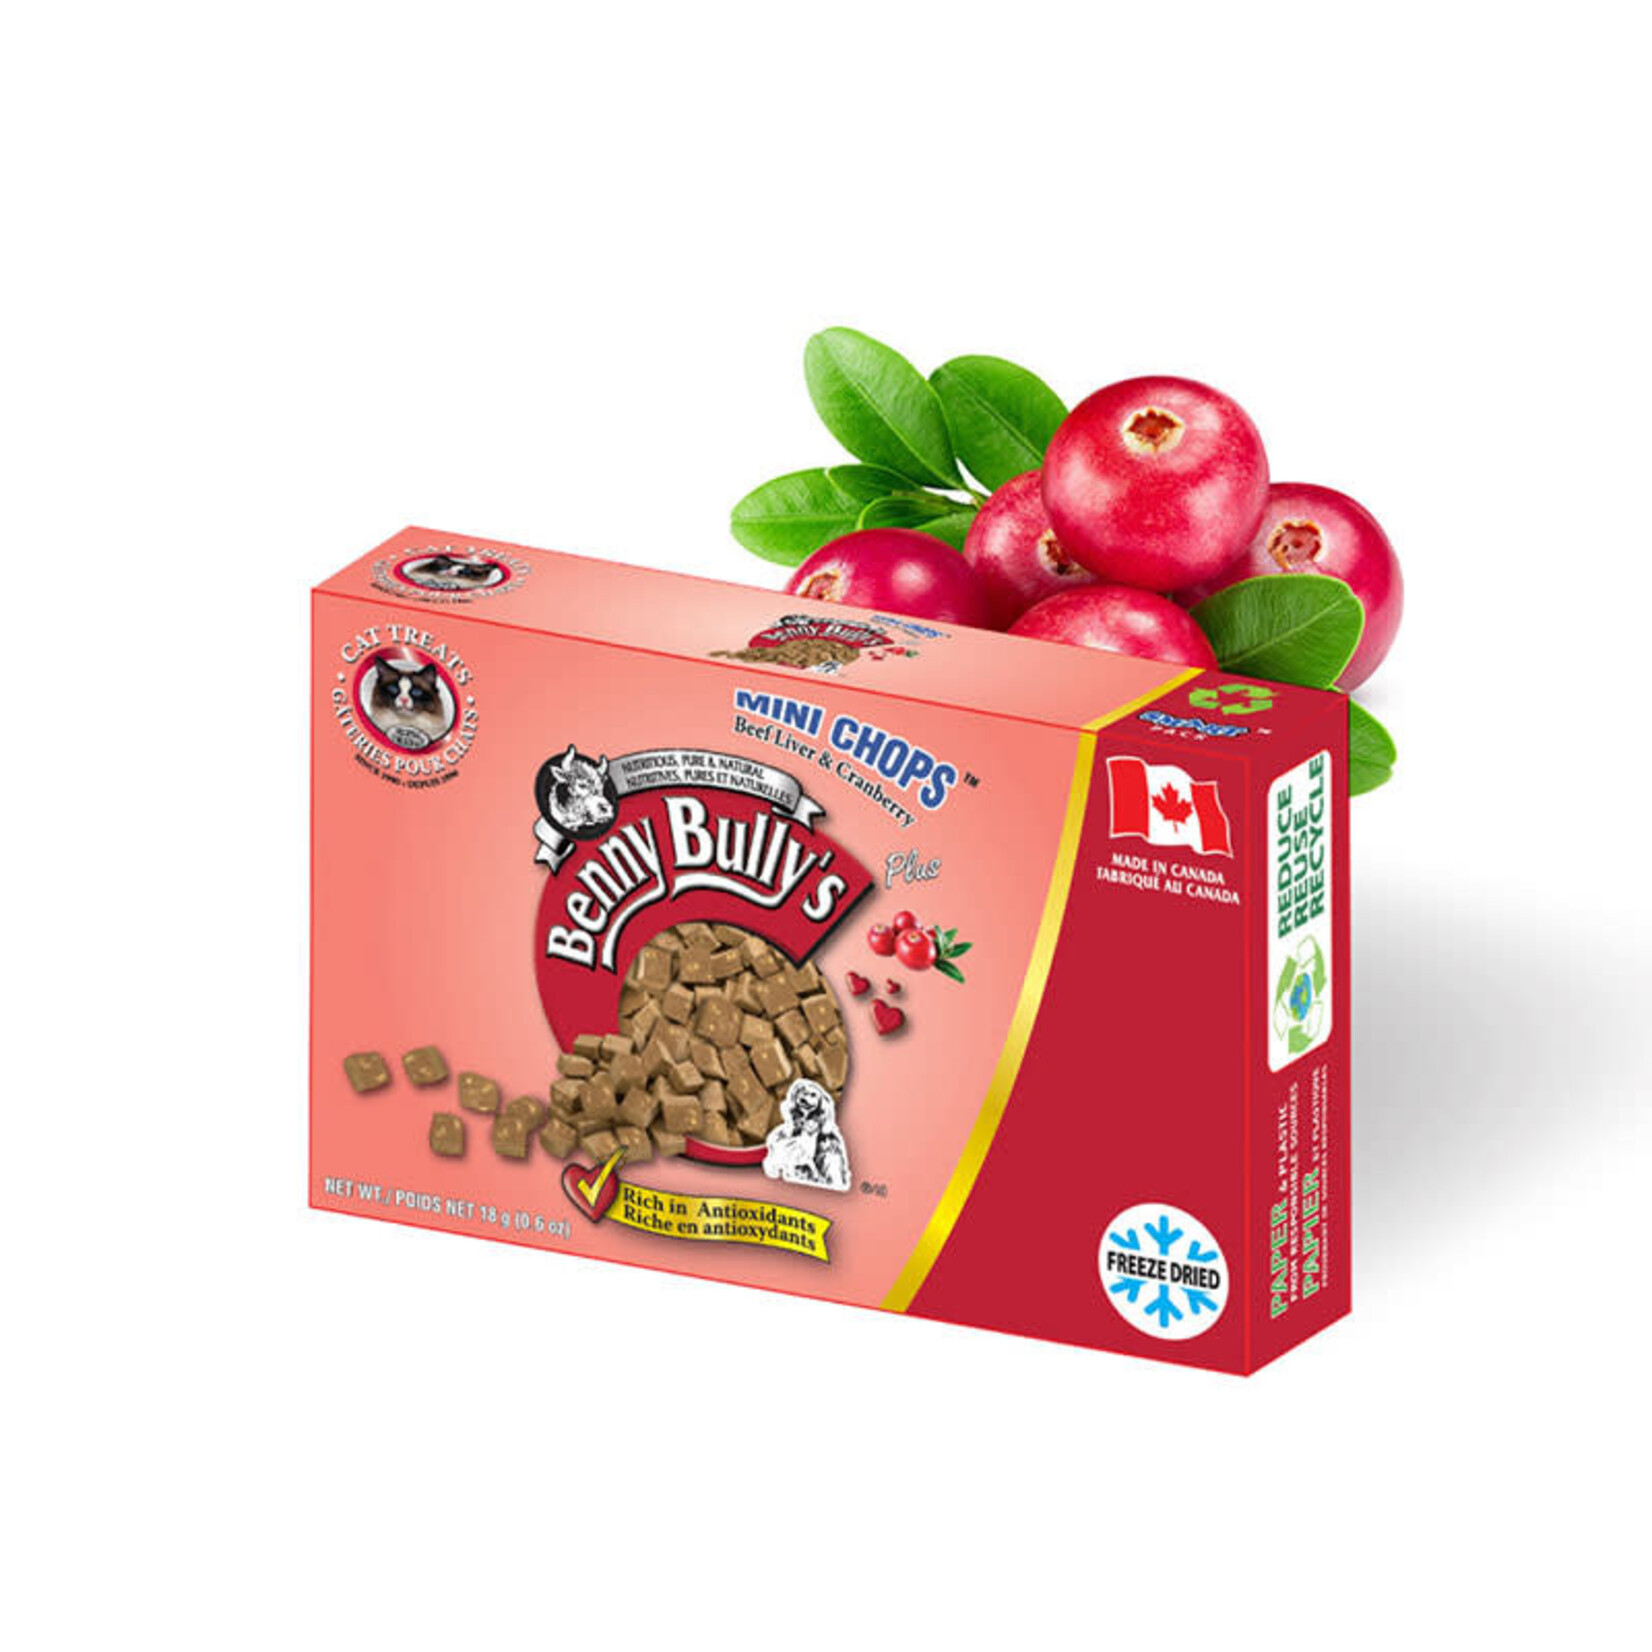 Benny Bully's - Smart Packs Mini - Beef Liver & Cranberry - 18g